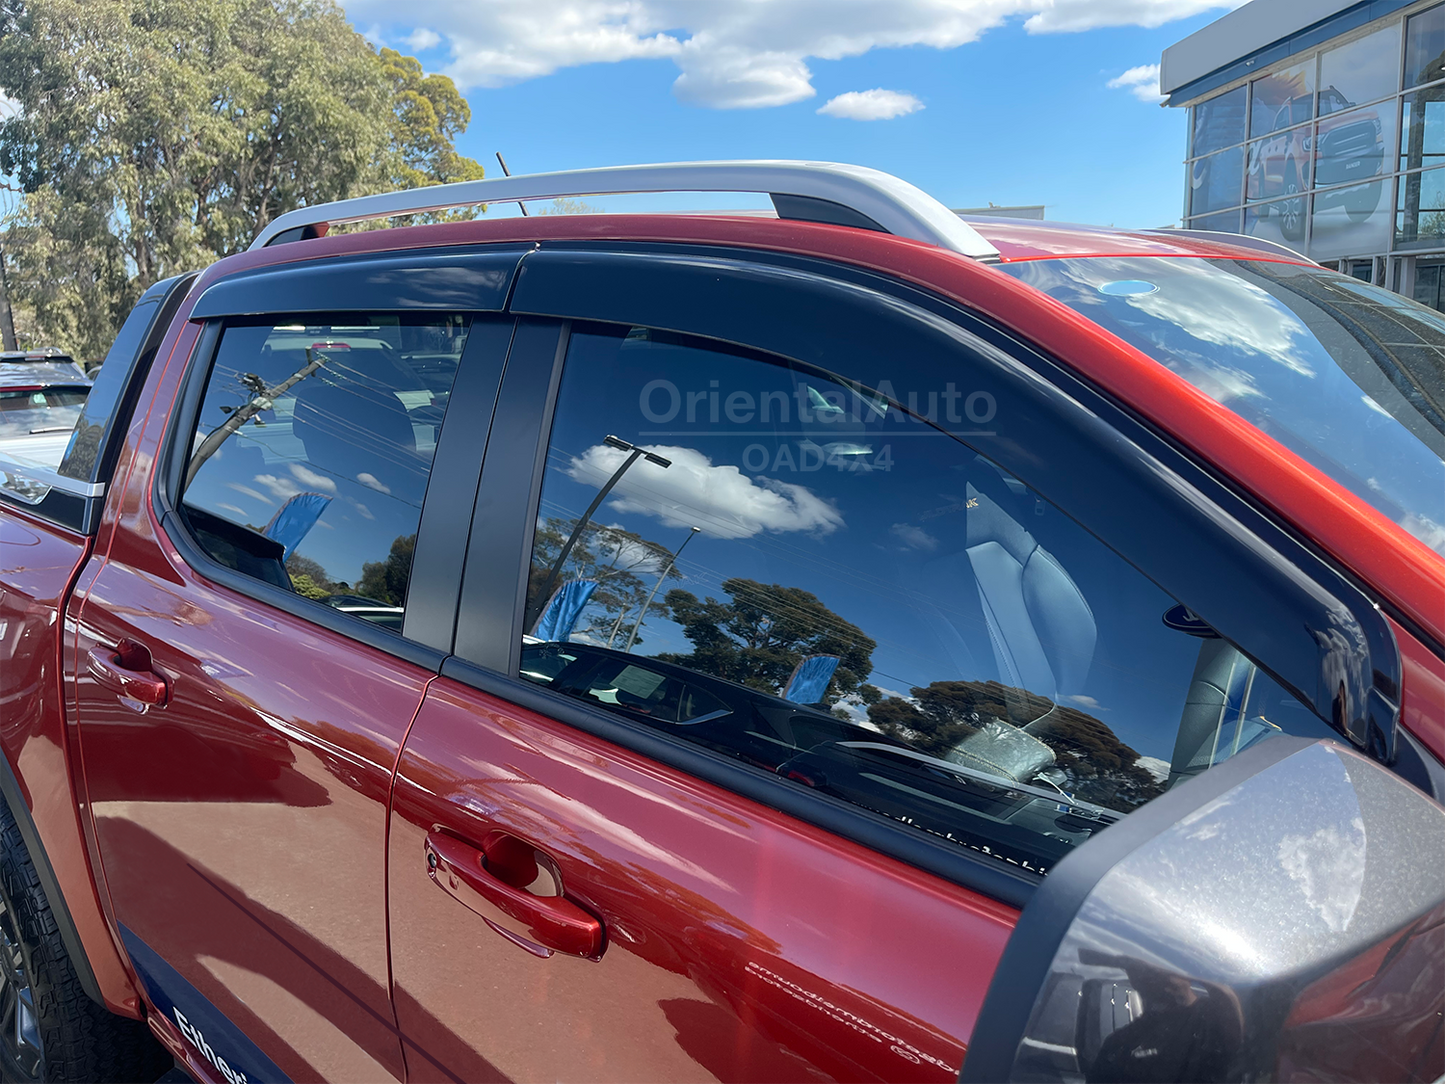 Injection Weather Shields & BLACK Door Sills Protector for Ford Ranger Dual Cab Next-Gen 2022+ Window Visors Weathershield Scuff Plates